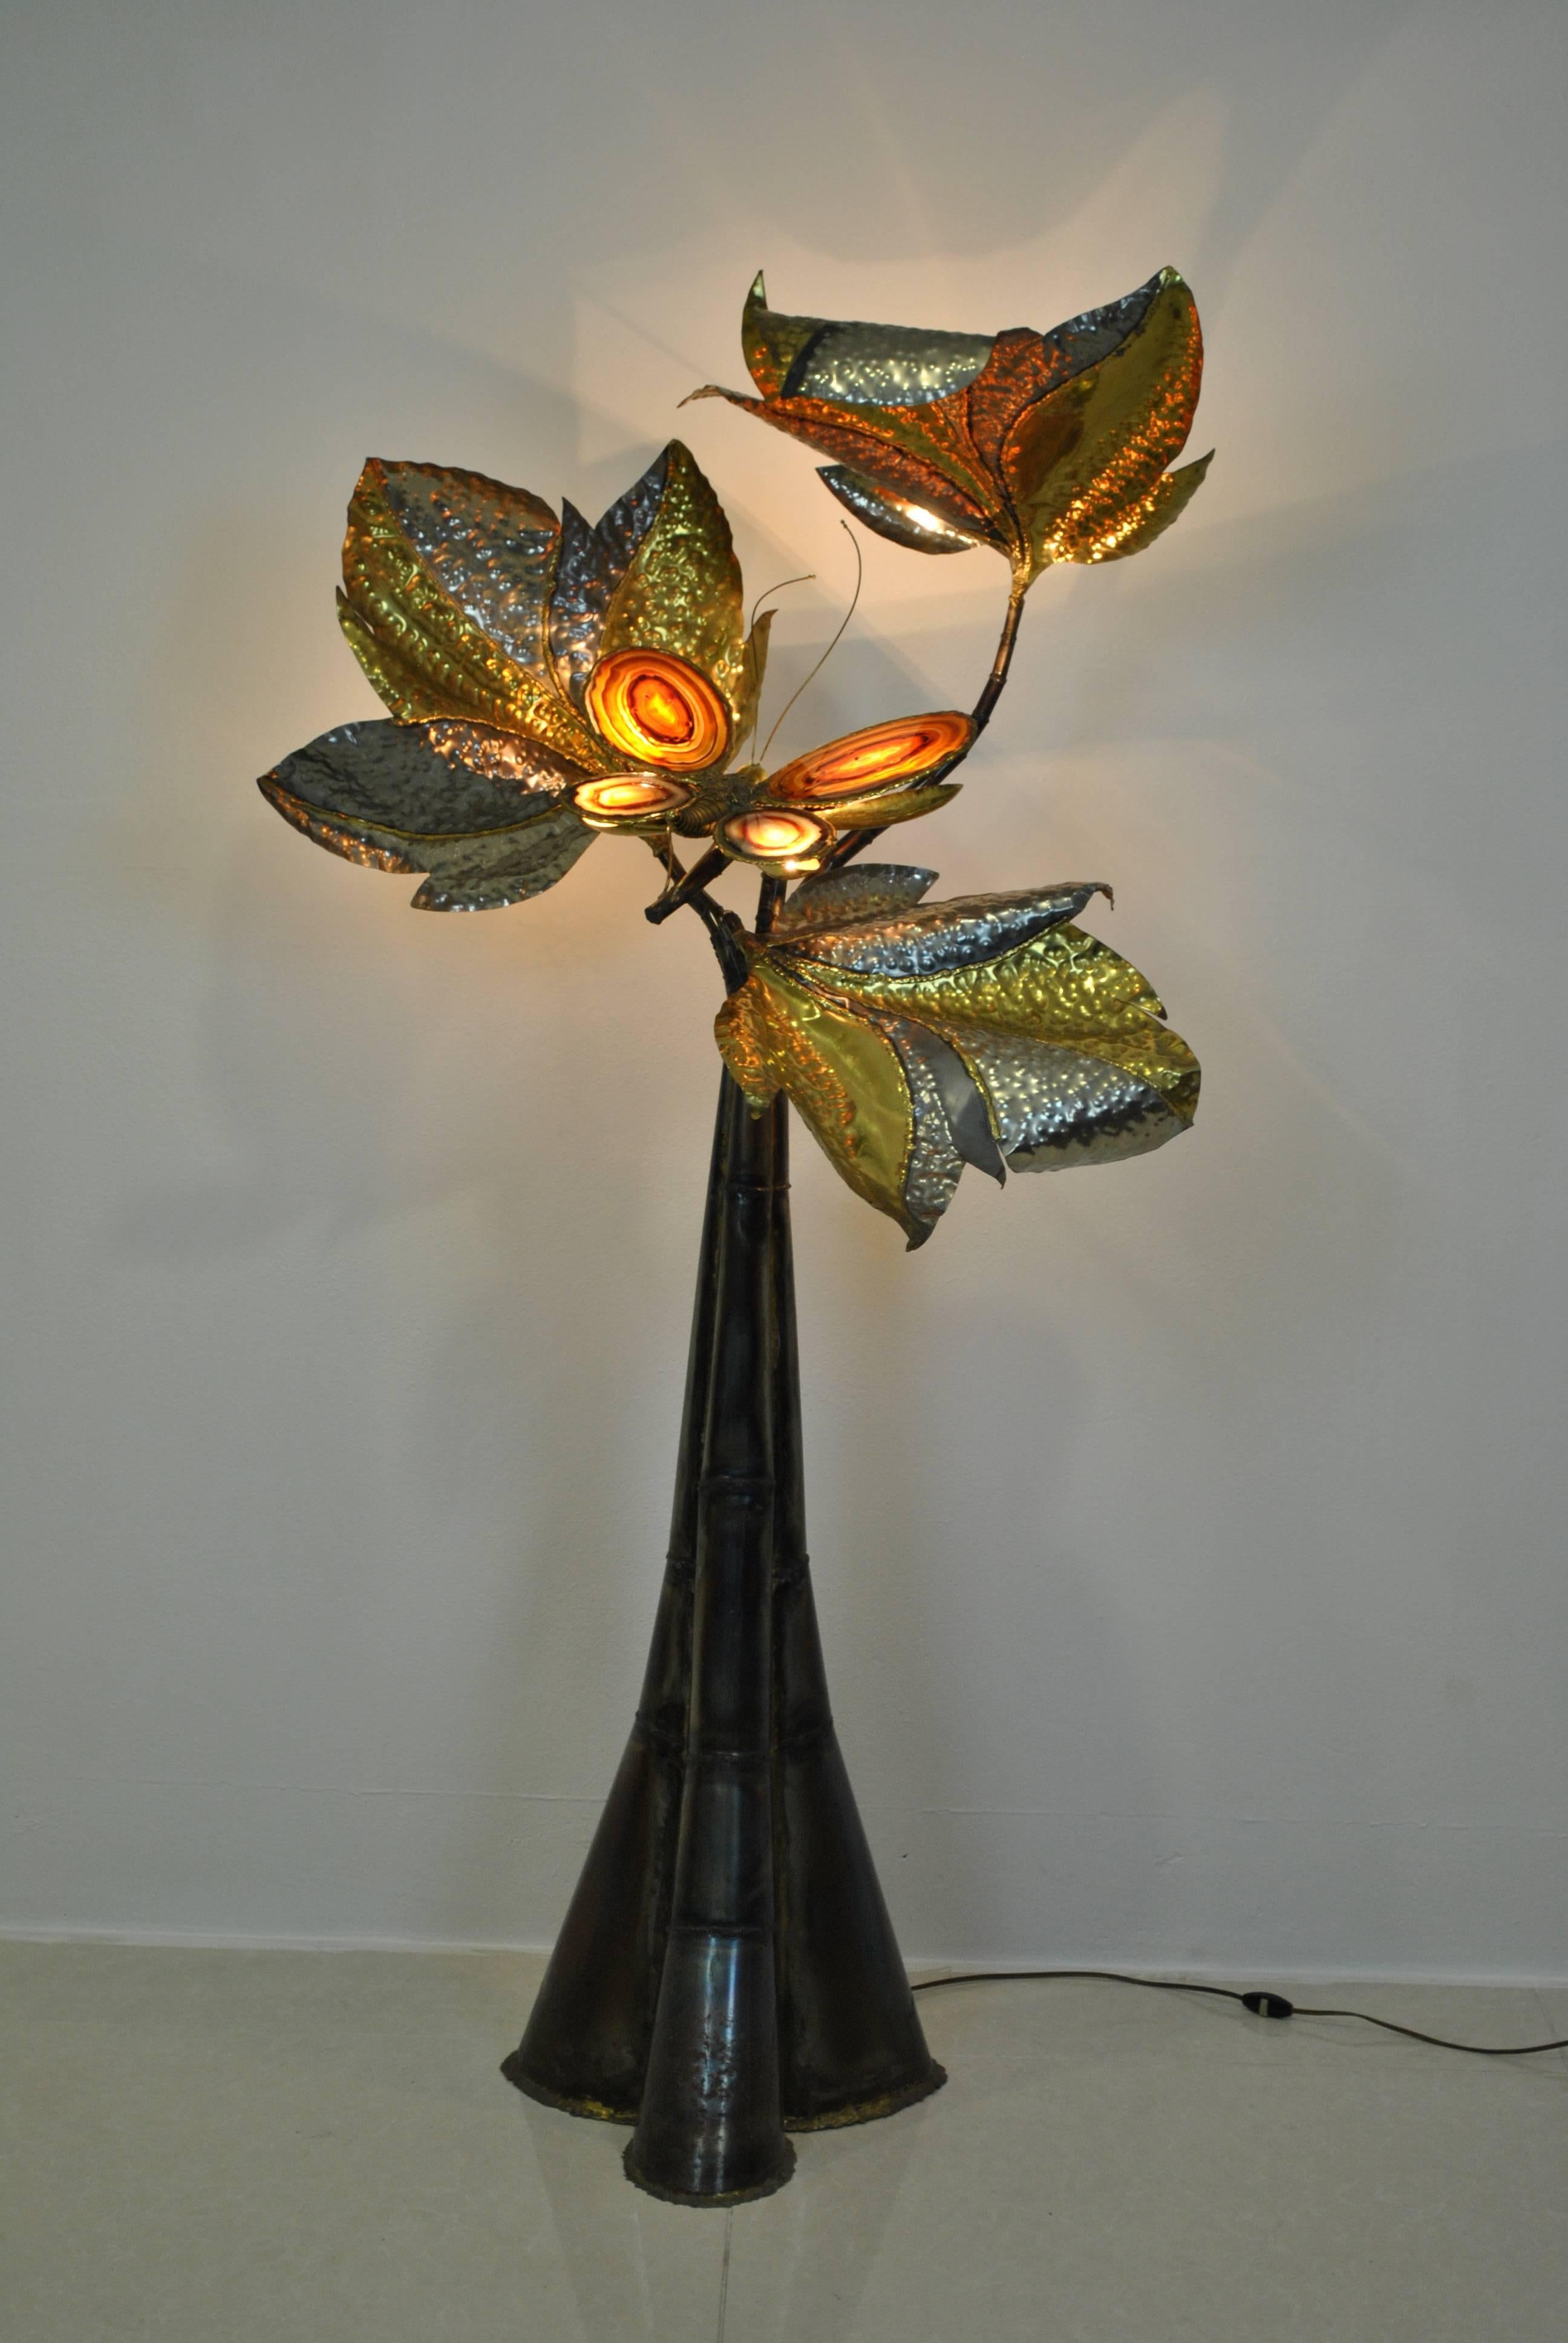 This is an important and large brass, steel and agate floor lamp made by Henri Fernandez in the 1970s for the Paris Maison Honoré.

This lamp is rare and is often attributed to Jacques Duval-Brasseur or Isabelle and Richard Faure, but piece is